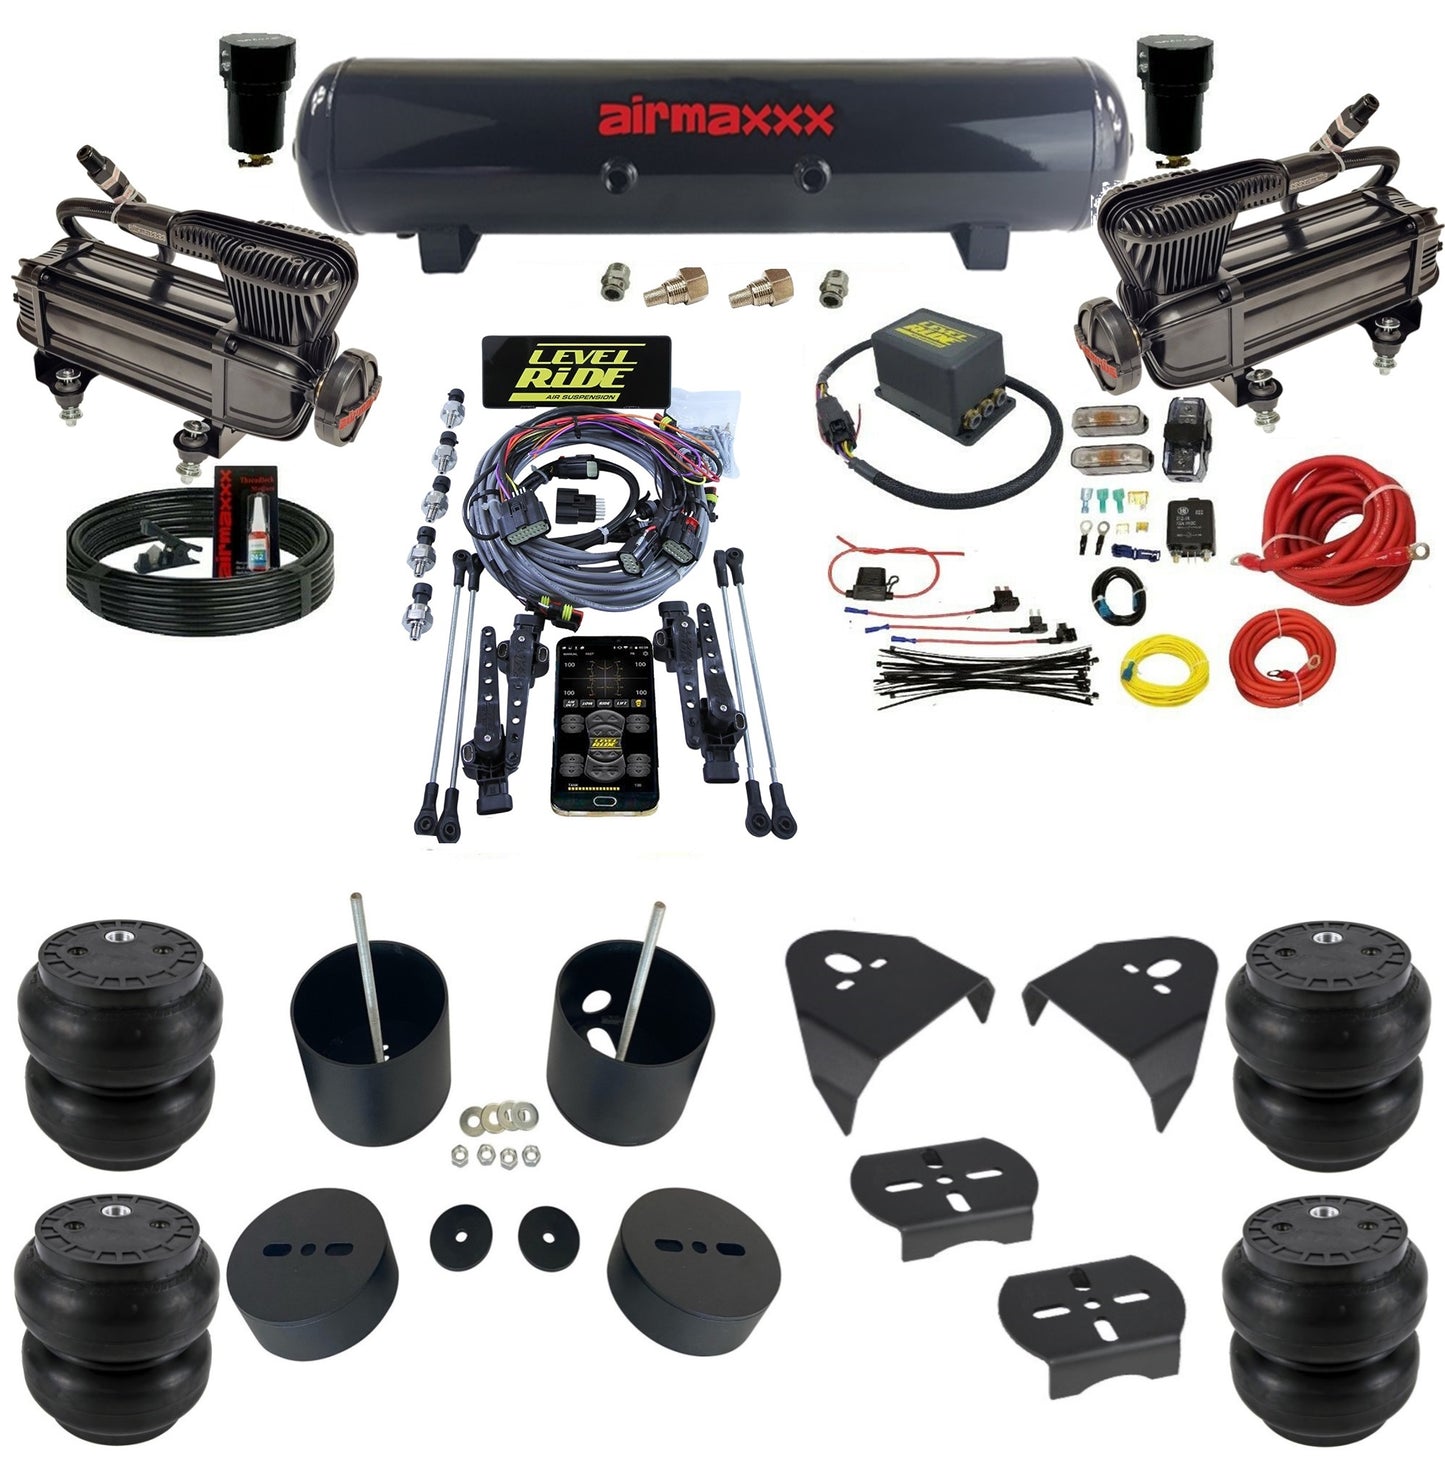 Complete Pressure Height Level Ride with Chrome 580 Air Suspension Kit Fits Chevy 1988-98 Silverado 1500